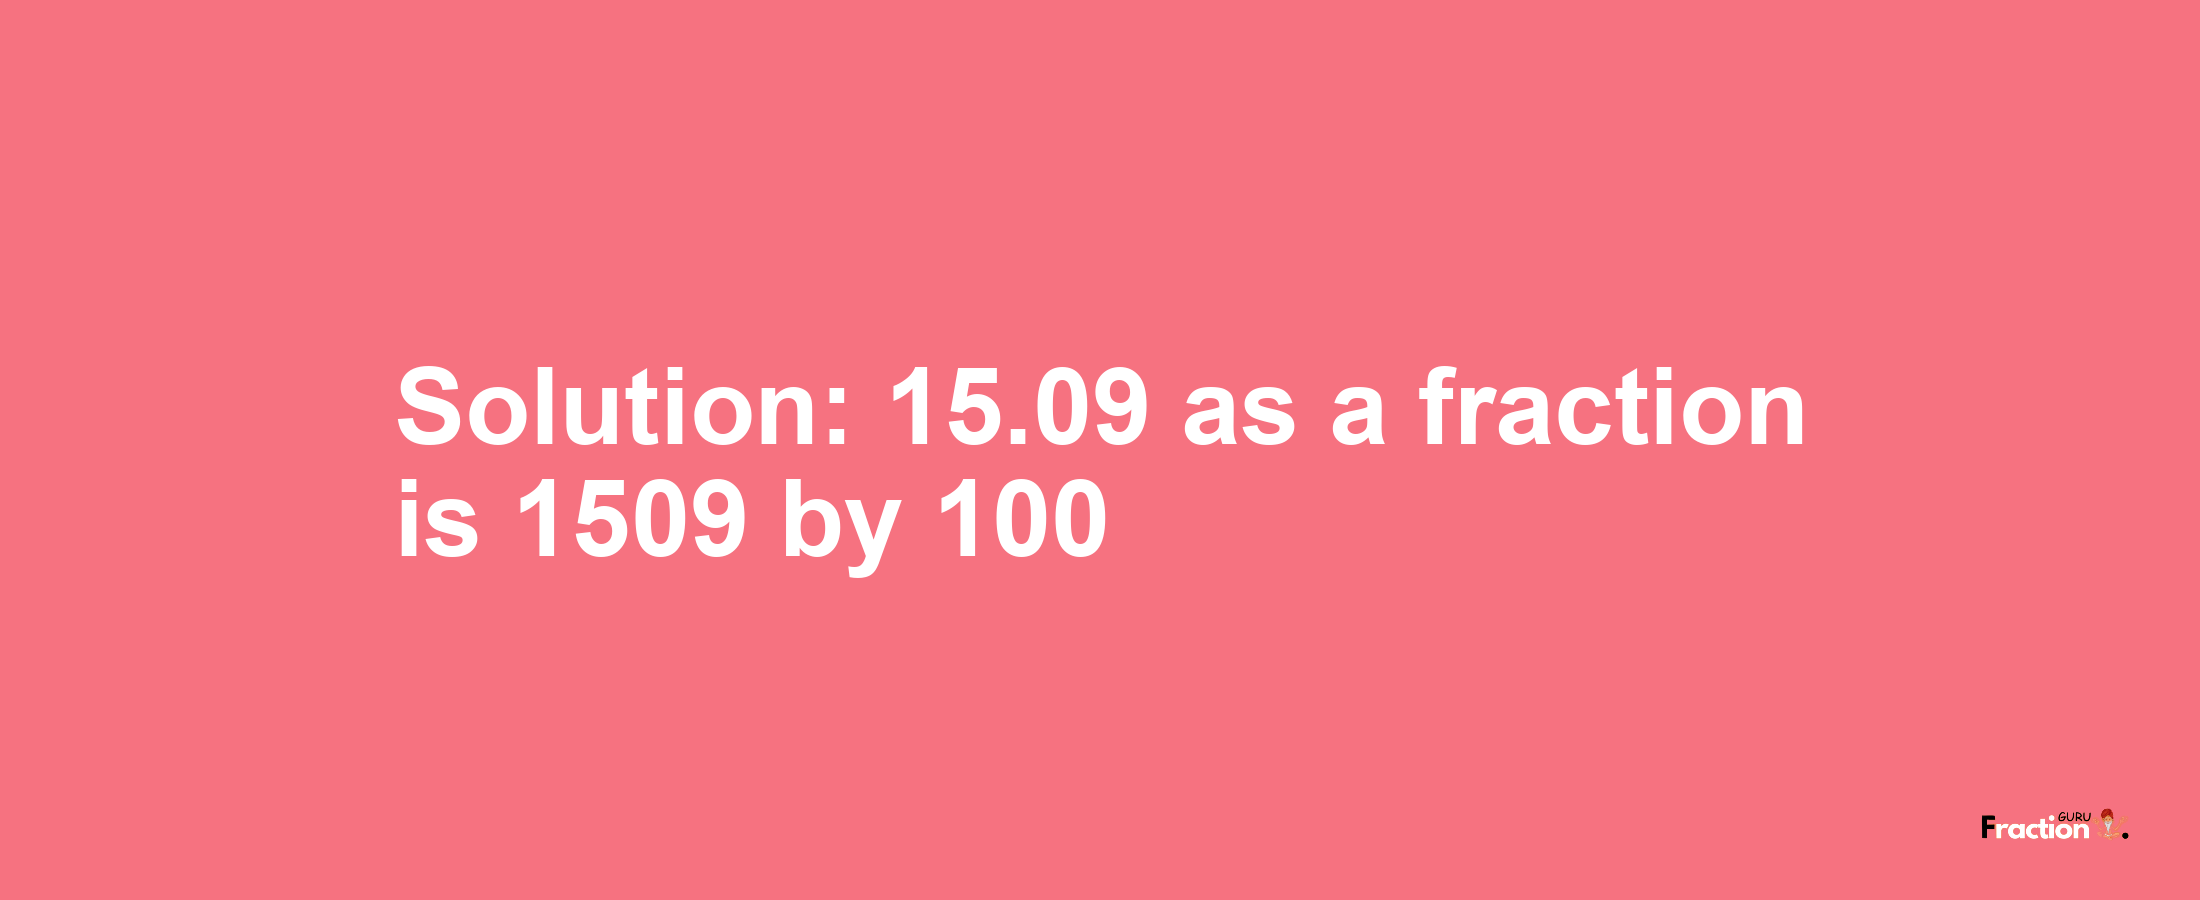 Solution:15.09 as a fraction is 1509/100